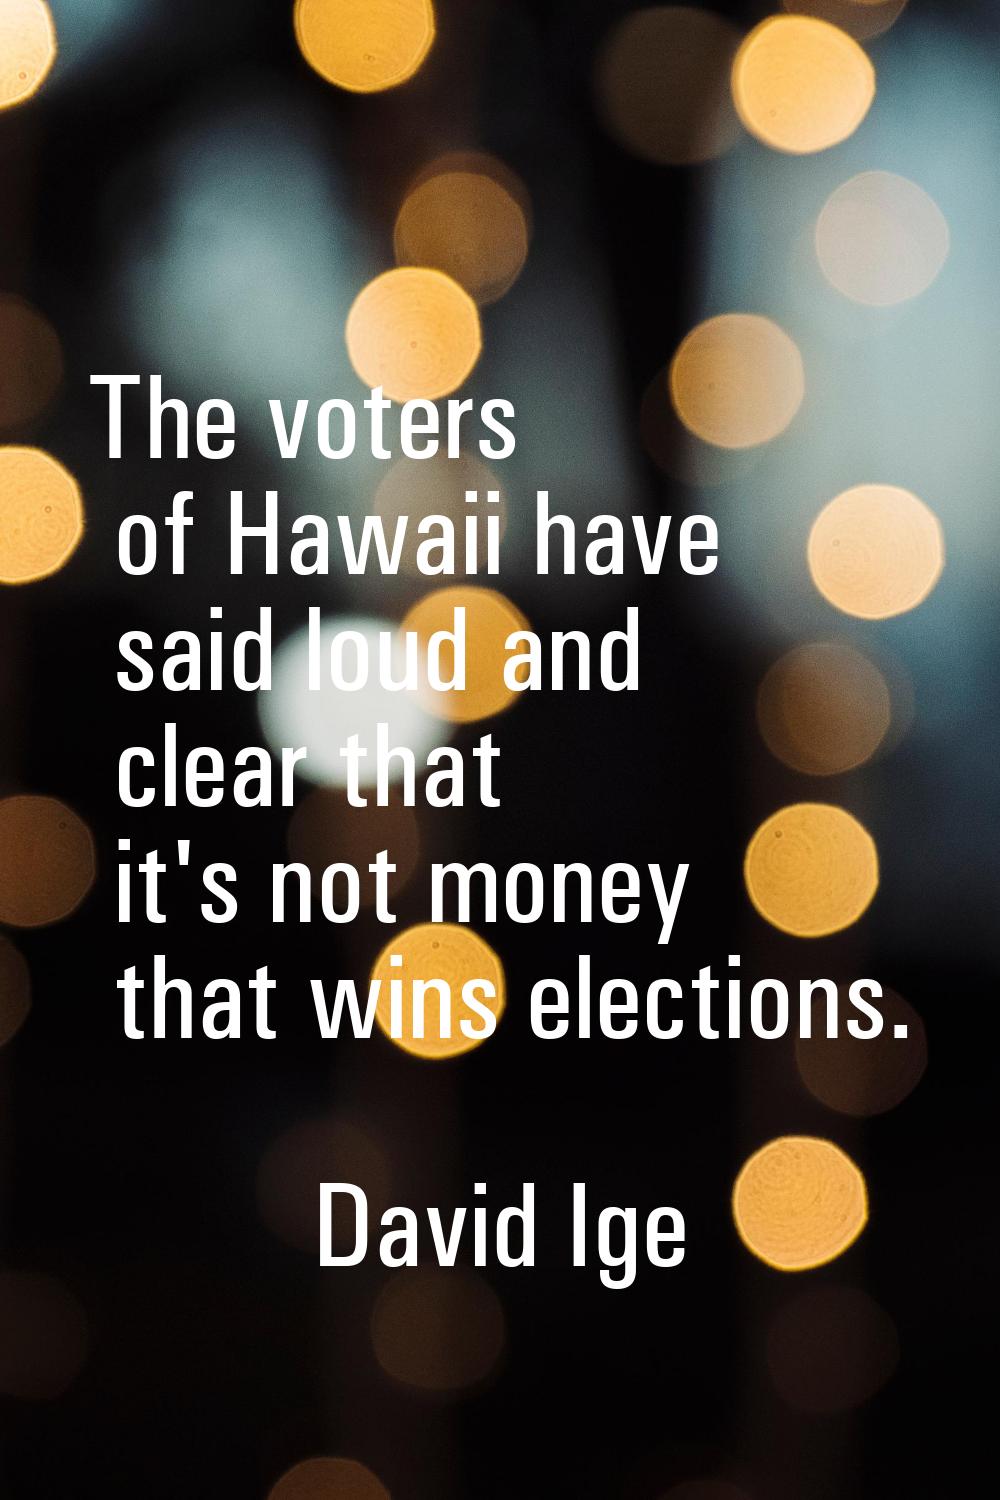 The voters of Hawaii have said loud and clear that it's not money that wins elections.